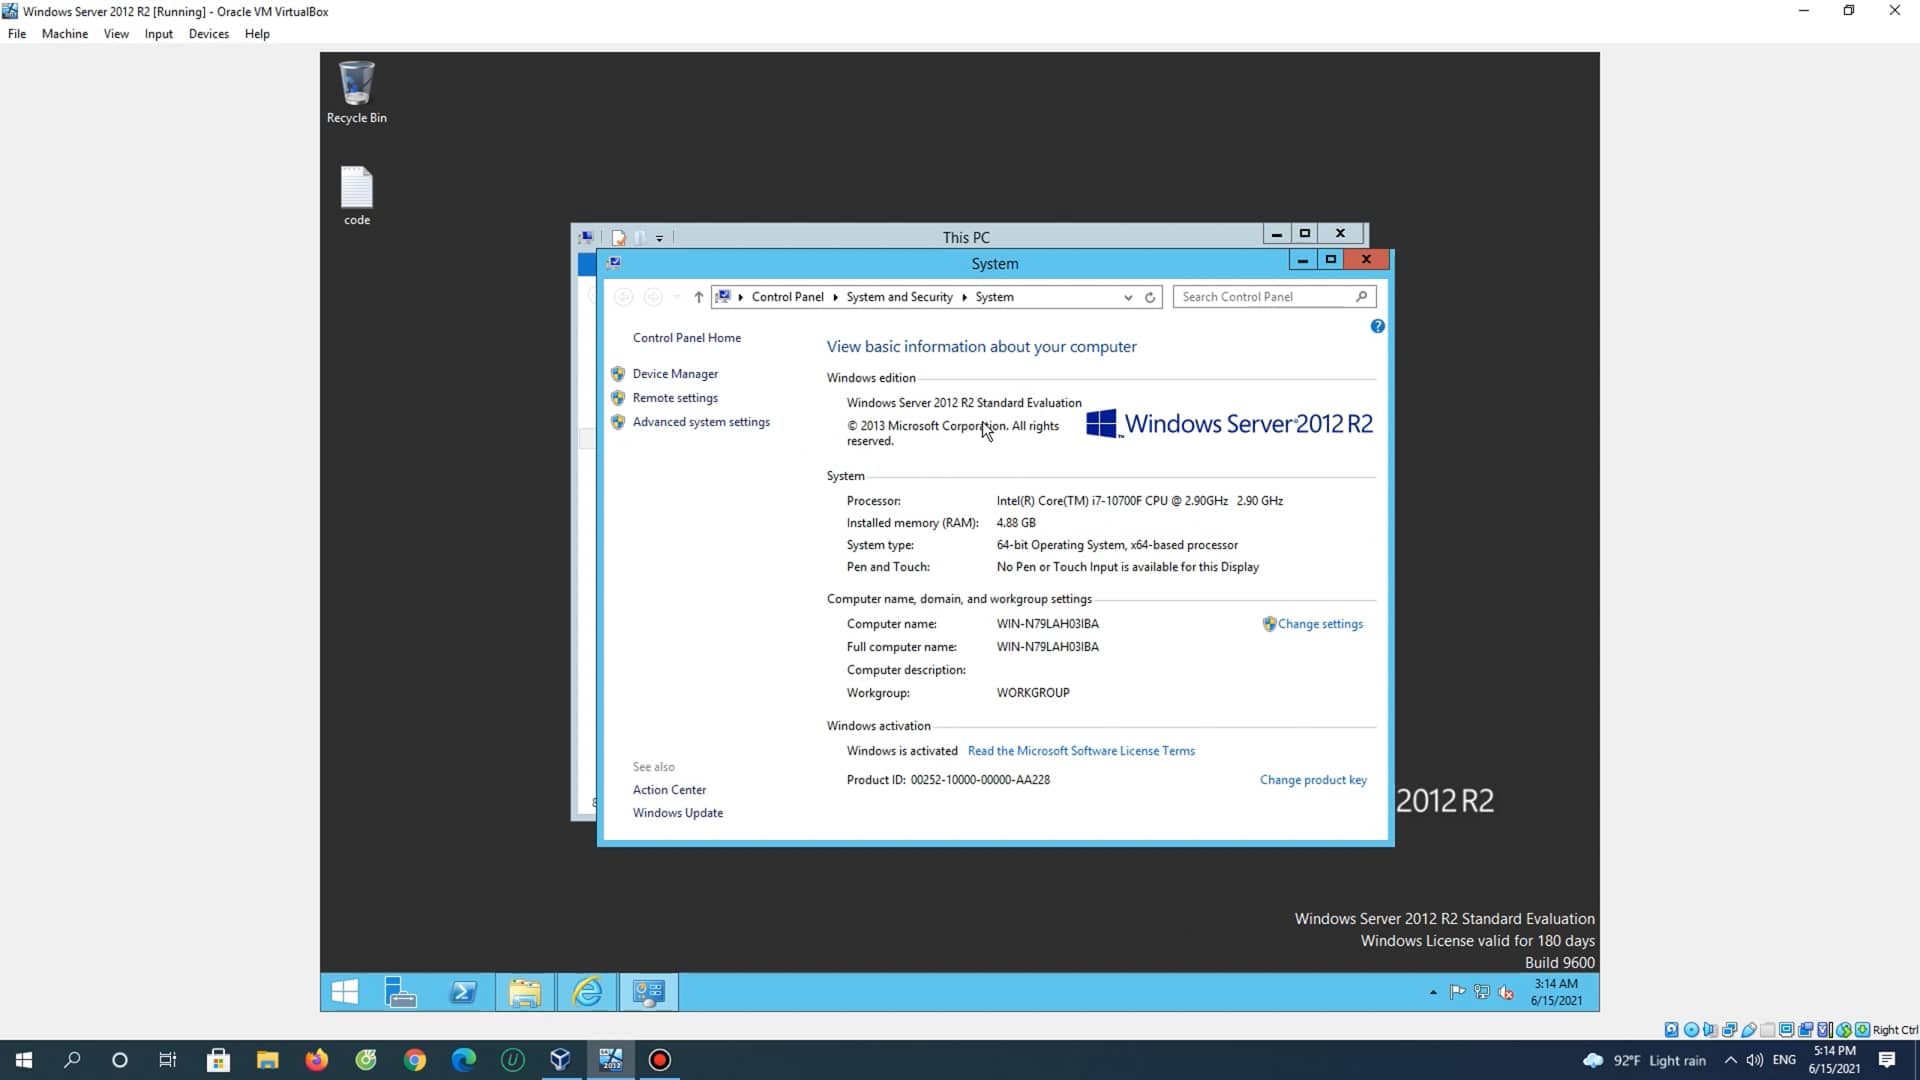 How To Activate Windows Server 2012 R2 Evaluation To Full Version On Vimeo 3594